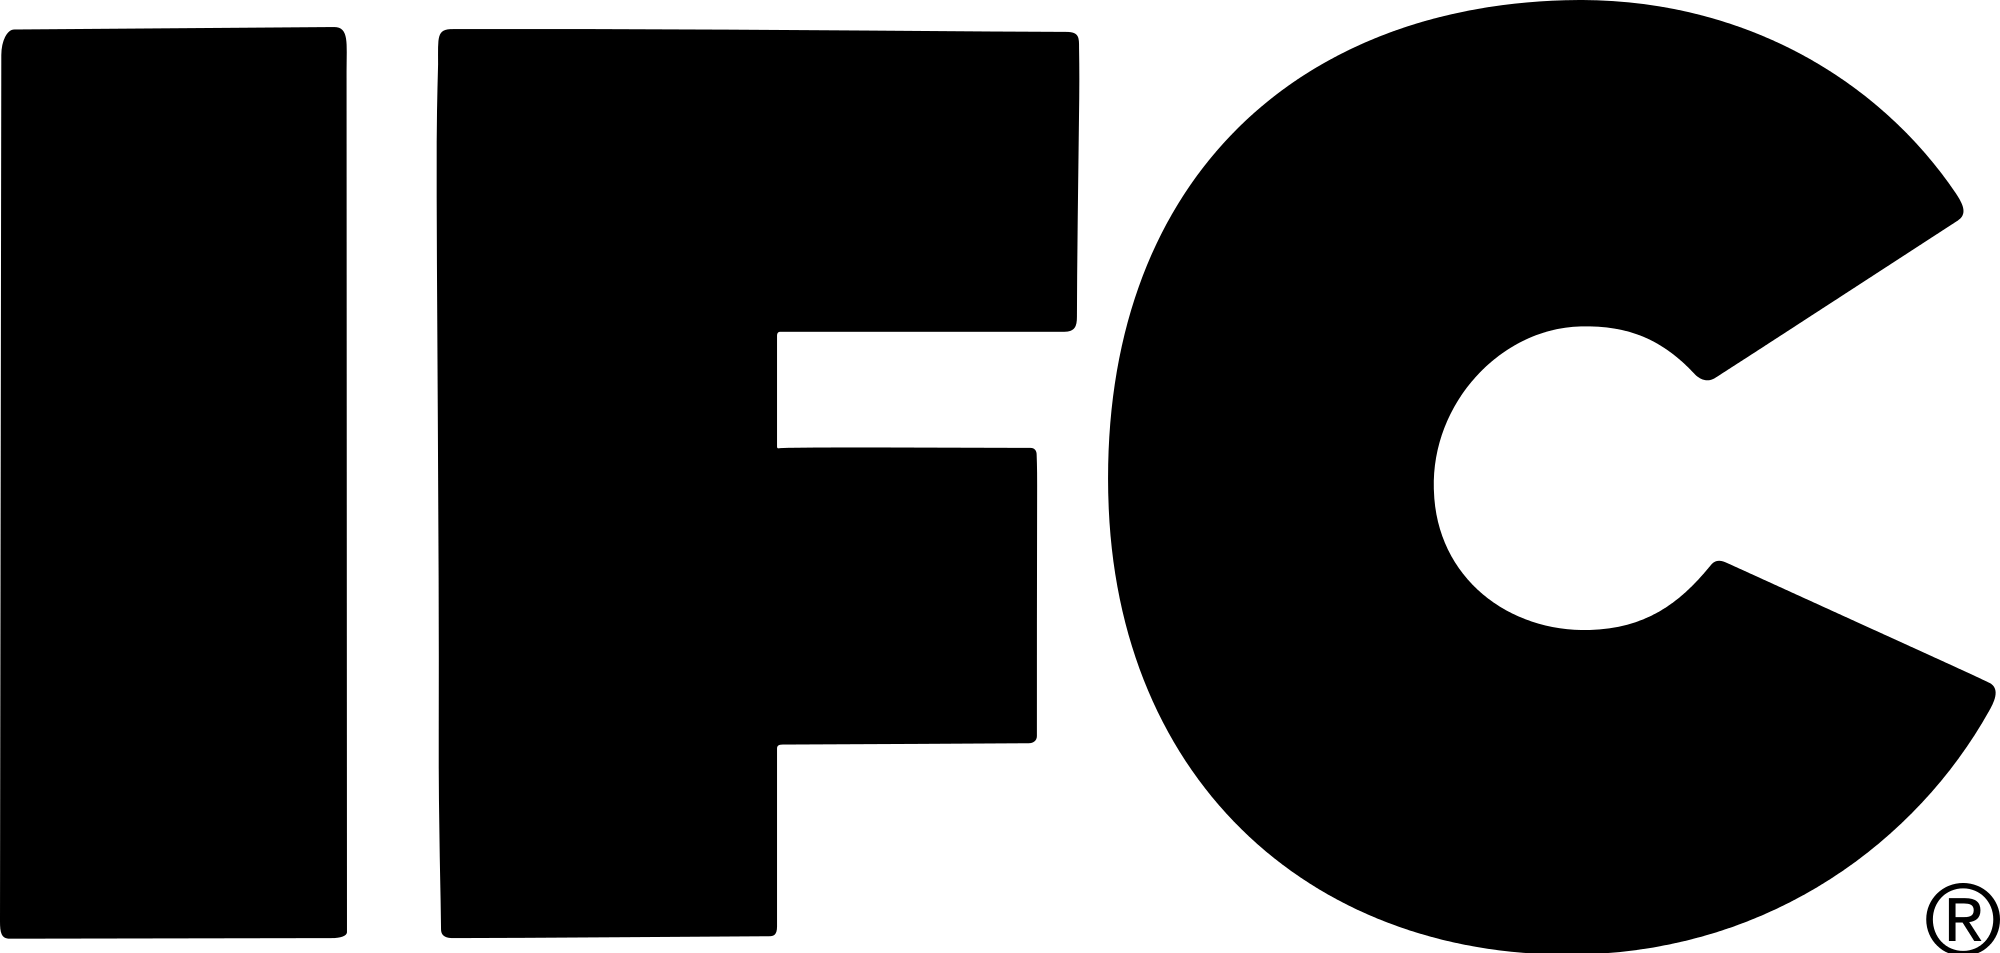 IFC Logo - File:Independent Film Channel (IFC) logo.svg - Wikimedia Commons